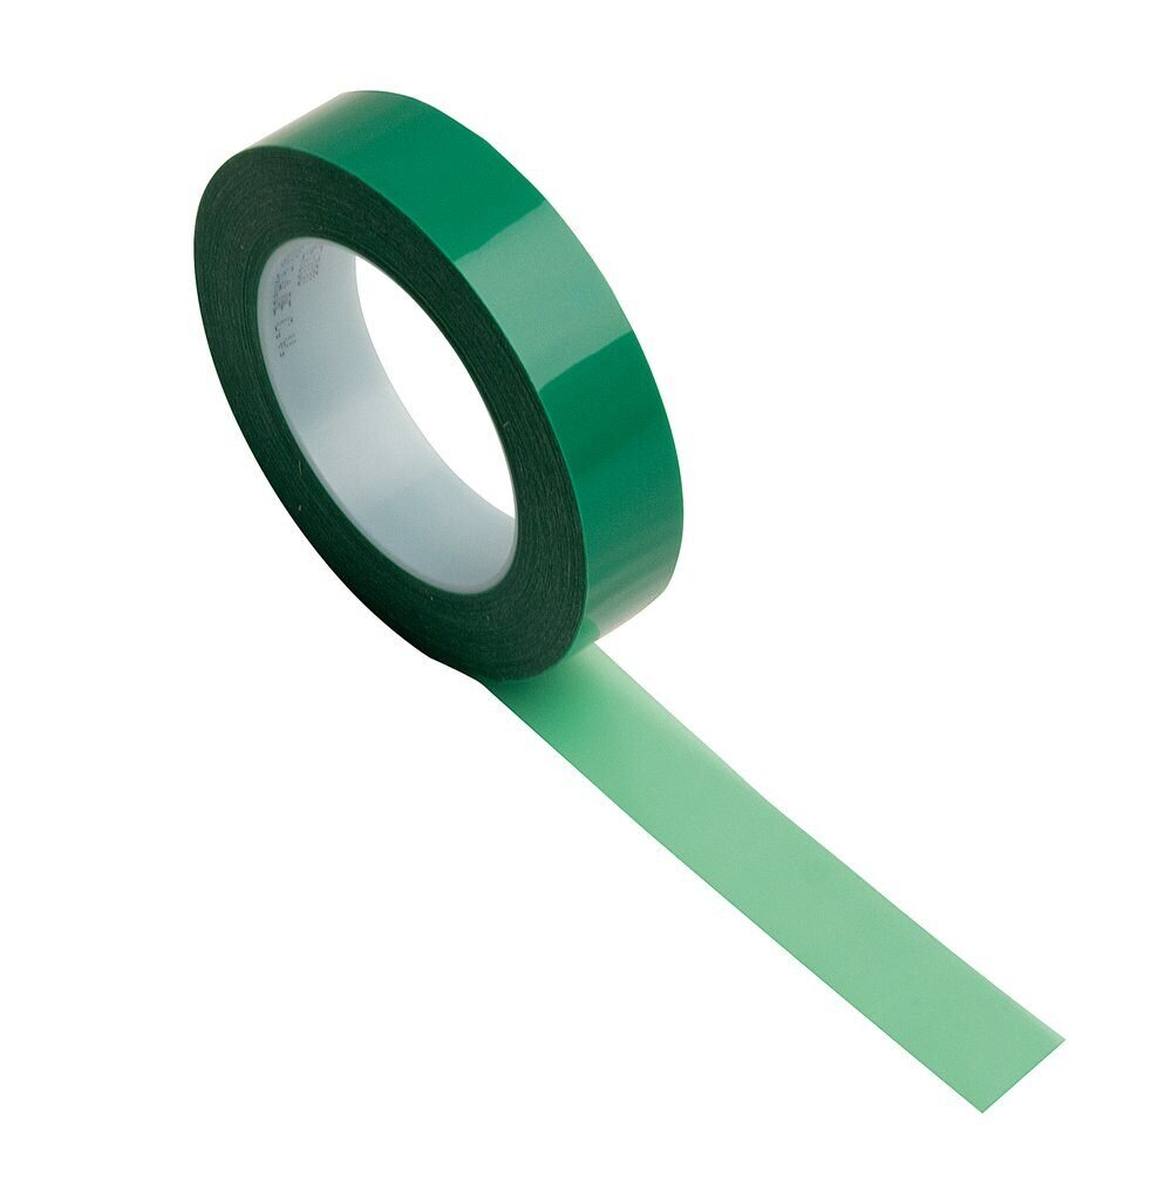 3M High-temperature polyester adhesive tape 851, green, 1219.2 mm x 66 m, 101.6 Âµm